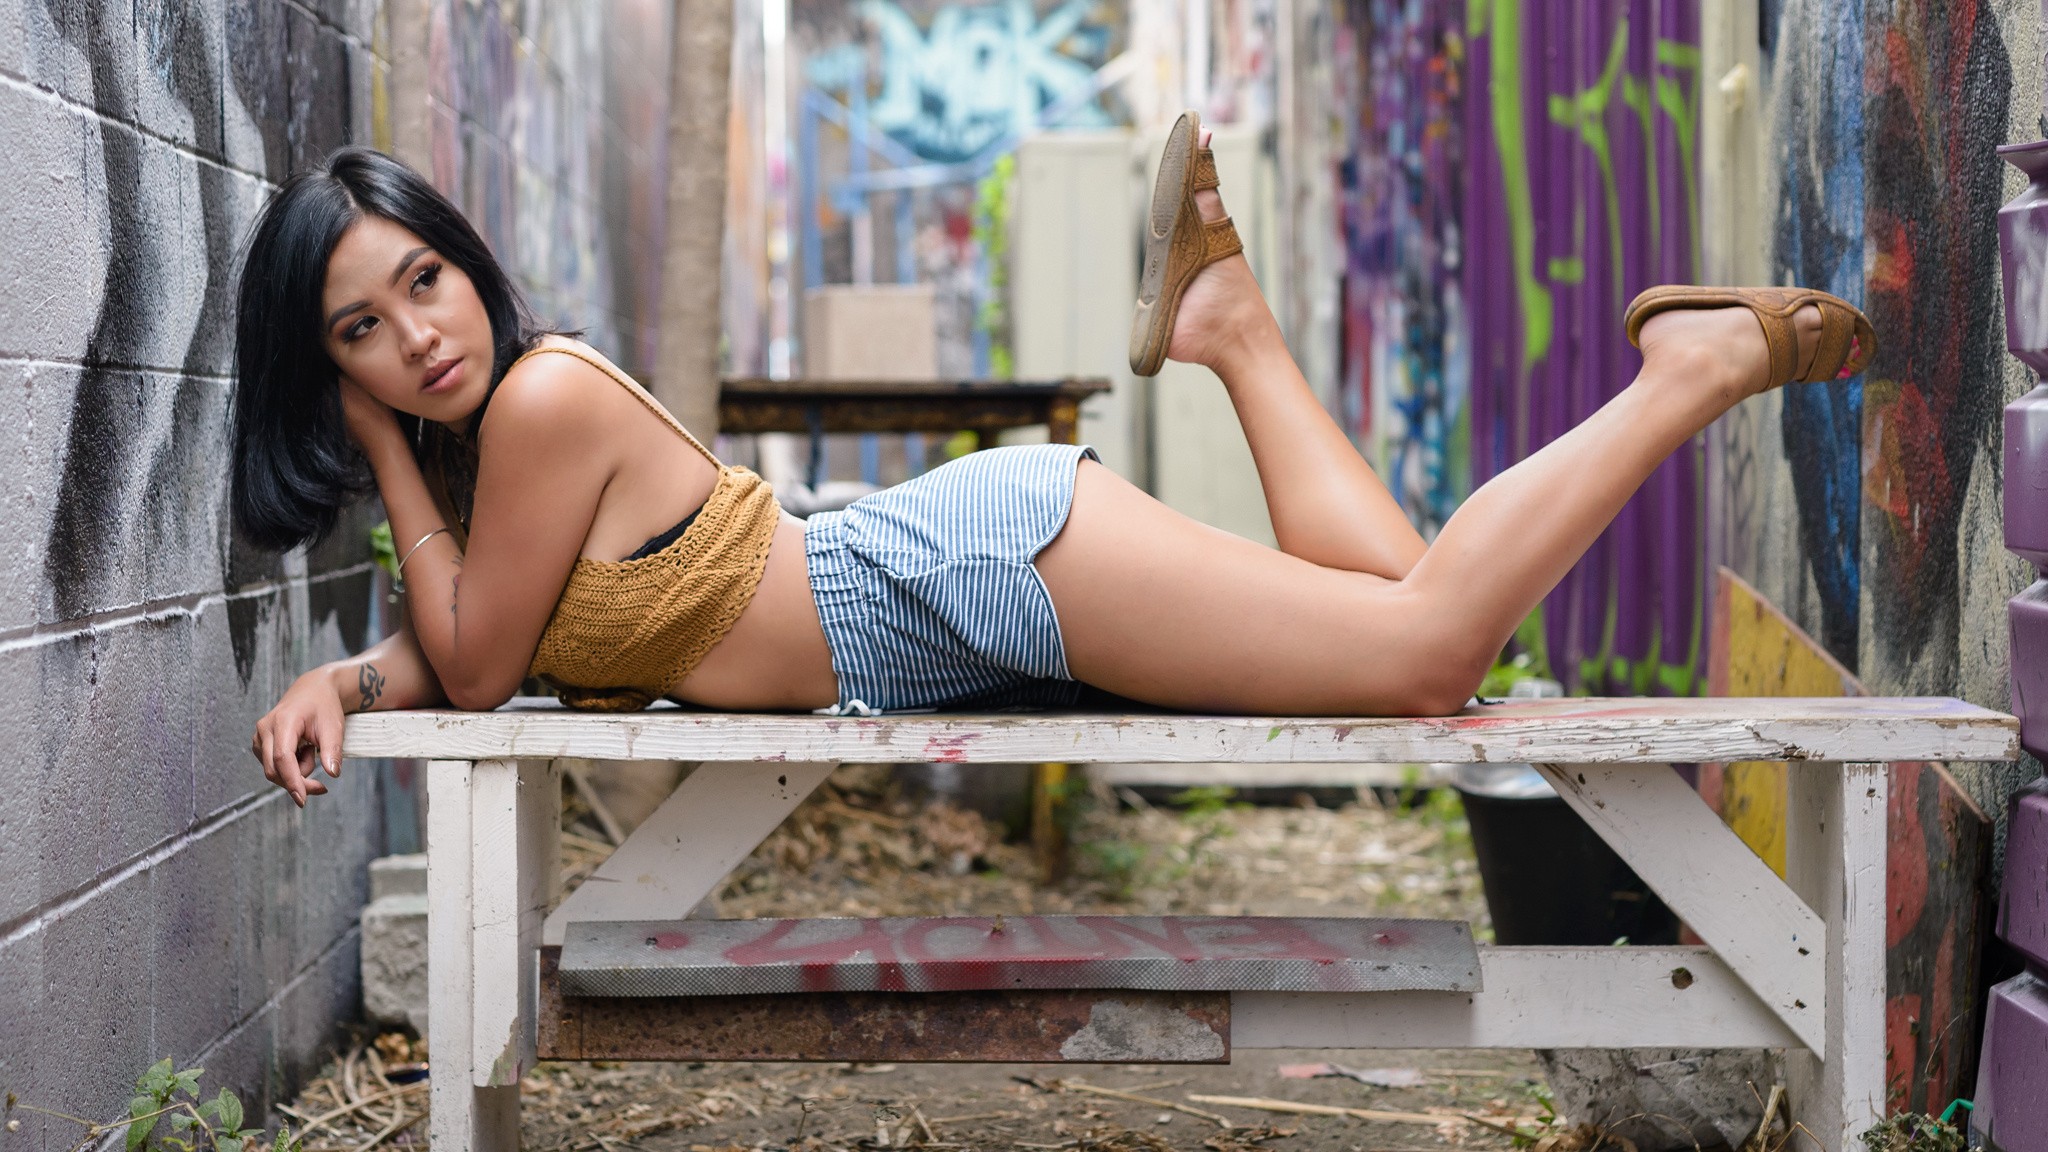 People 2048x1152 Gizel Ramos shorts ass looking away legs up sandals tattoo lying on front looking up black hair inked girls women outdoors urban painted toenails women model